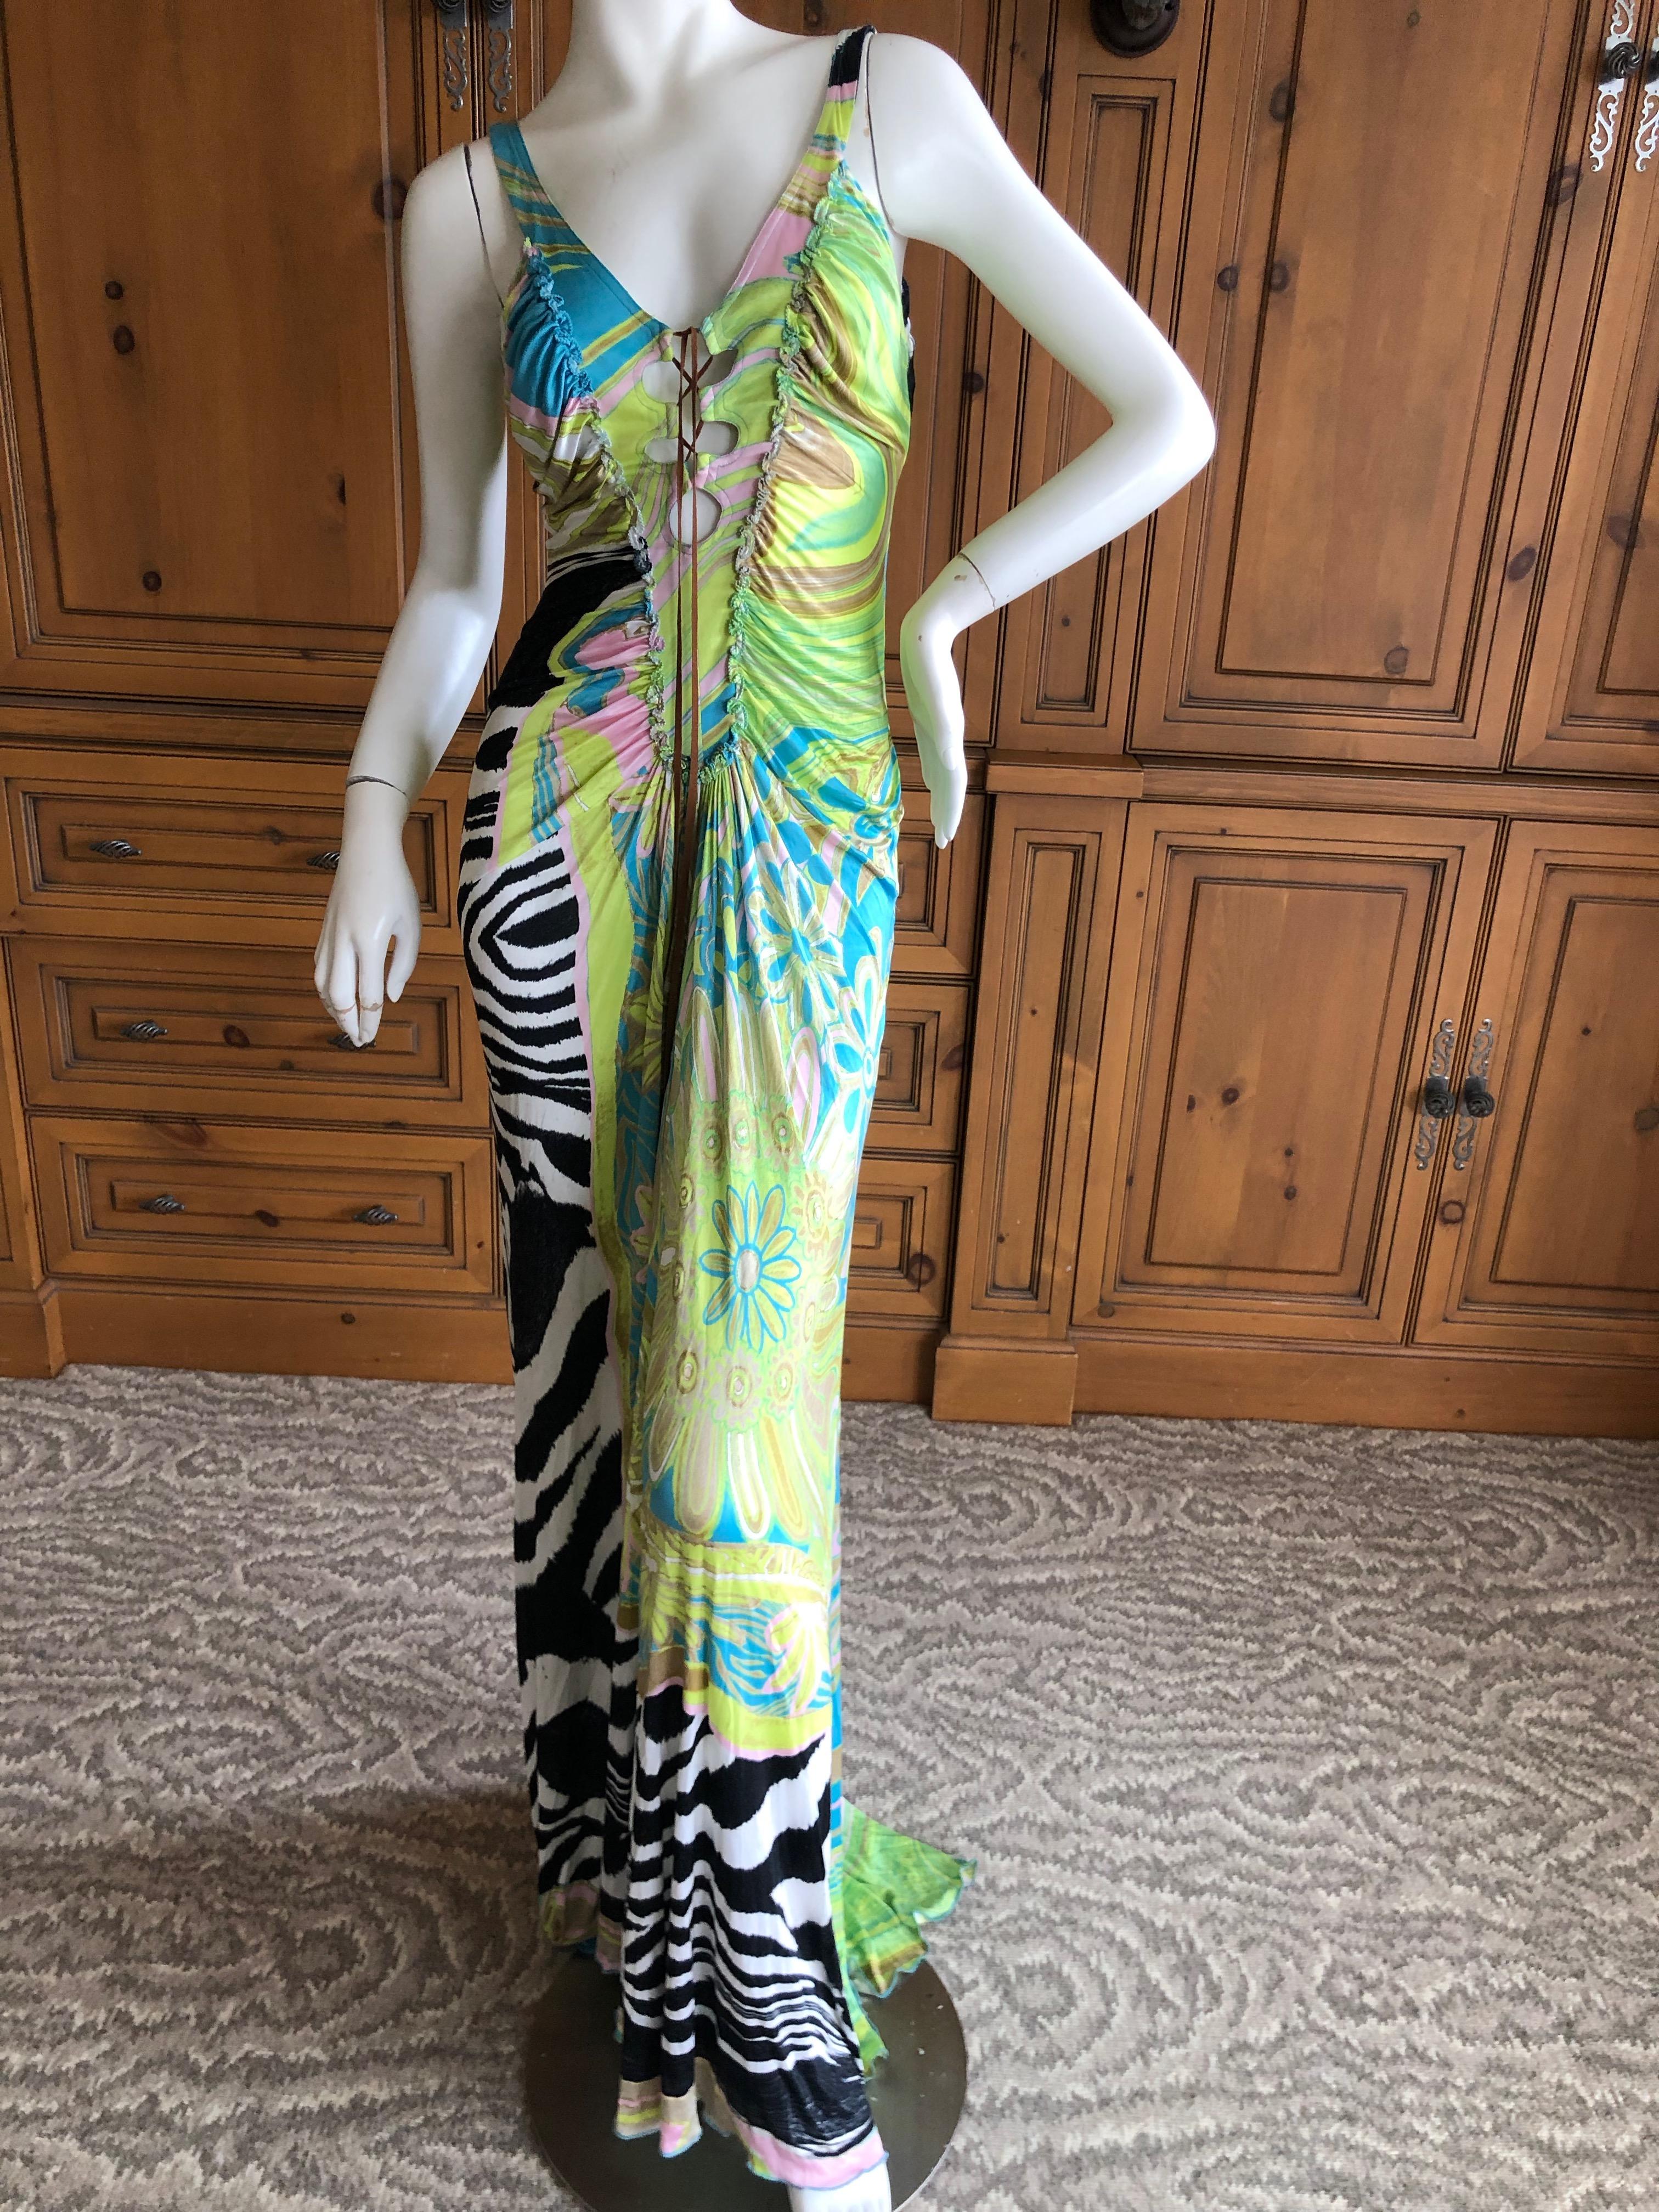 Roberto Cavalli Vintage Multi Print Evening Dress with Lace Up Details In Excellent Condition For Sale In Cloverdale, CA